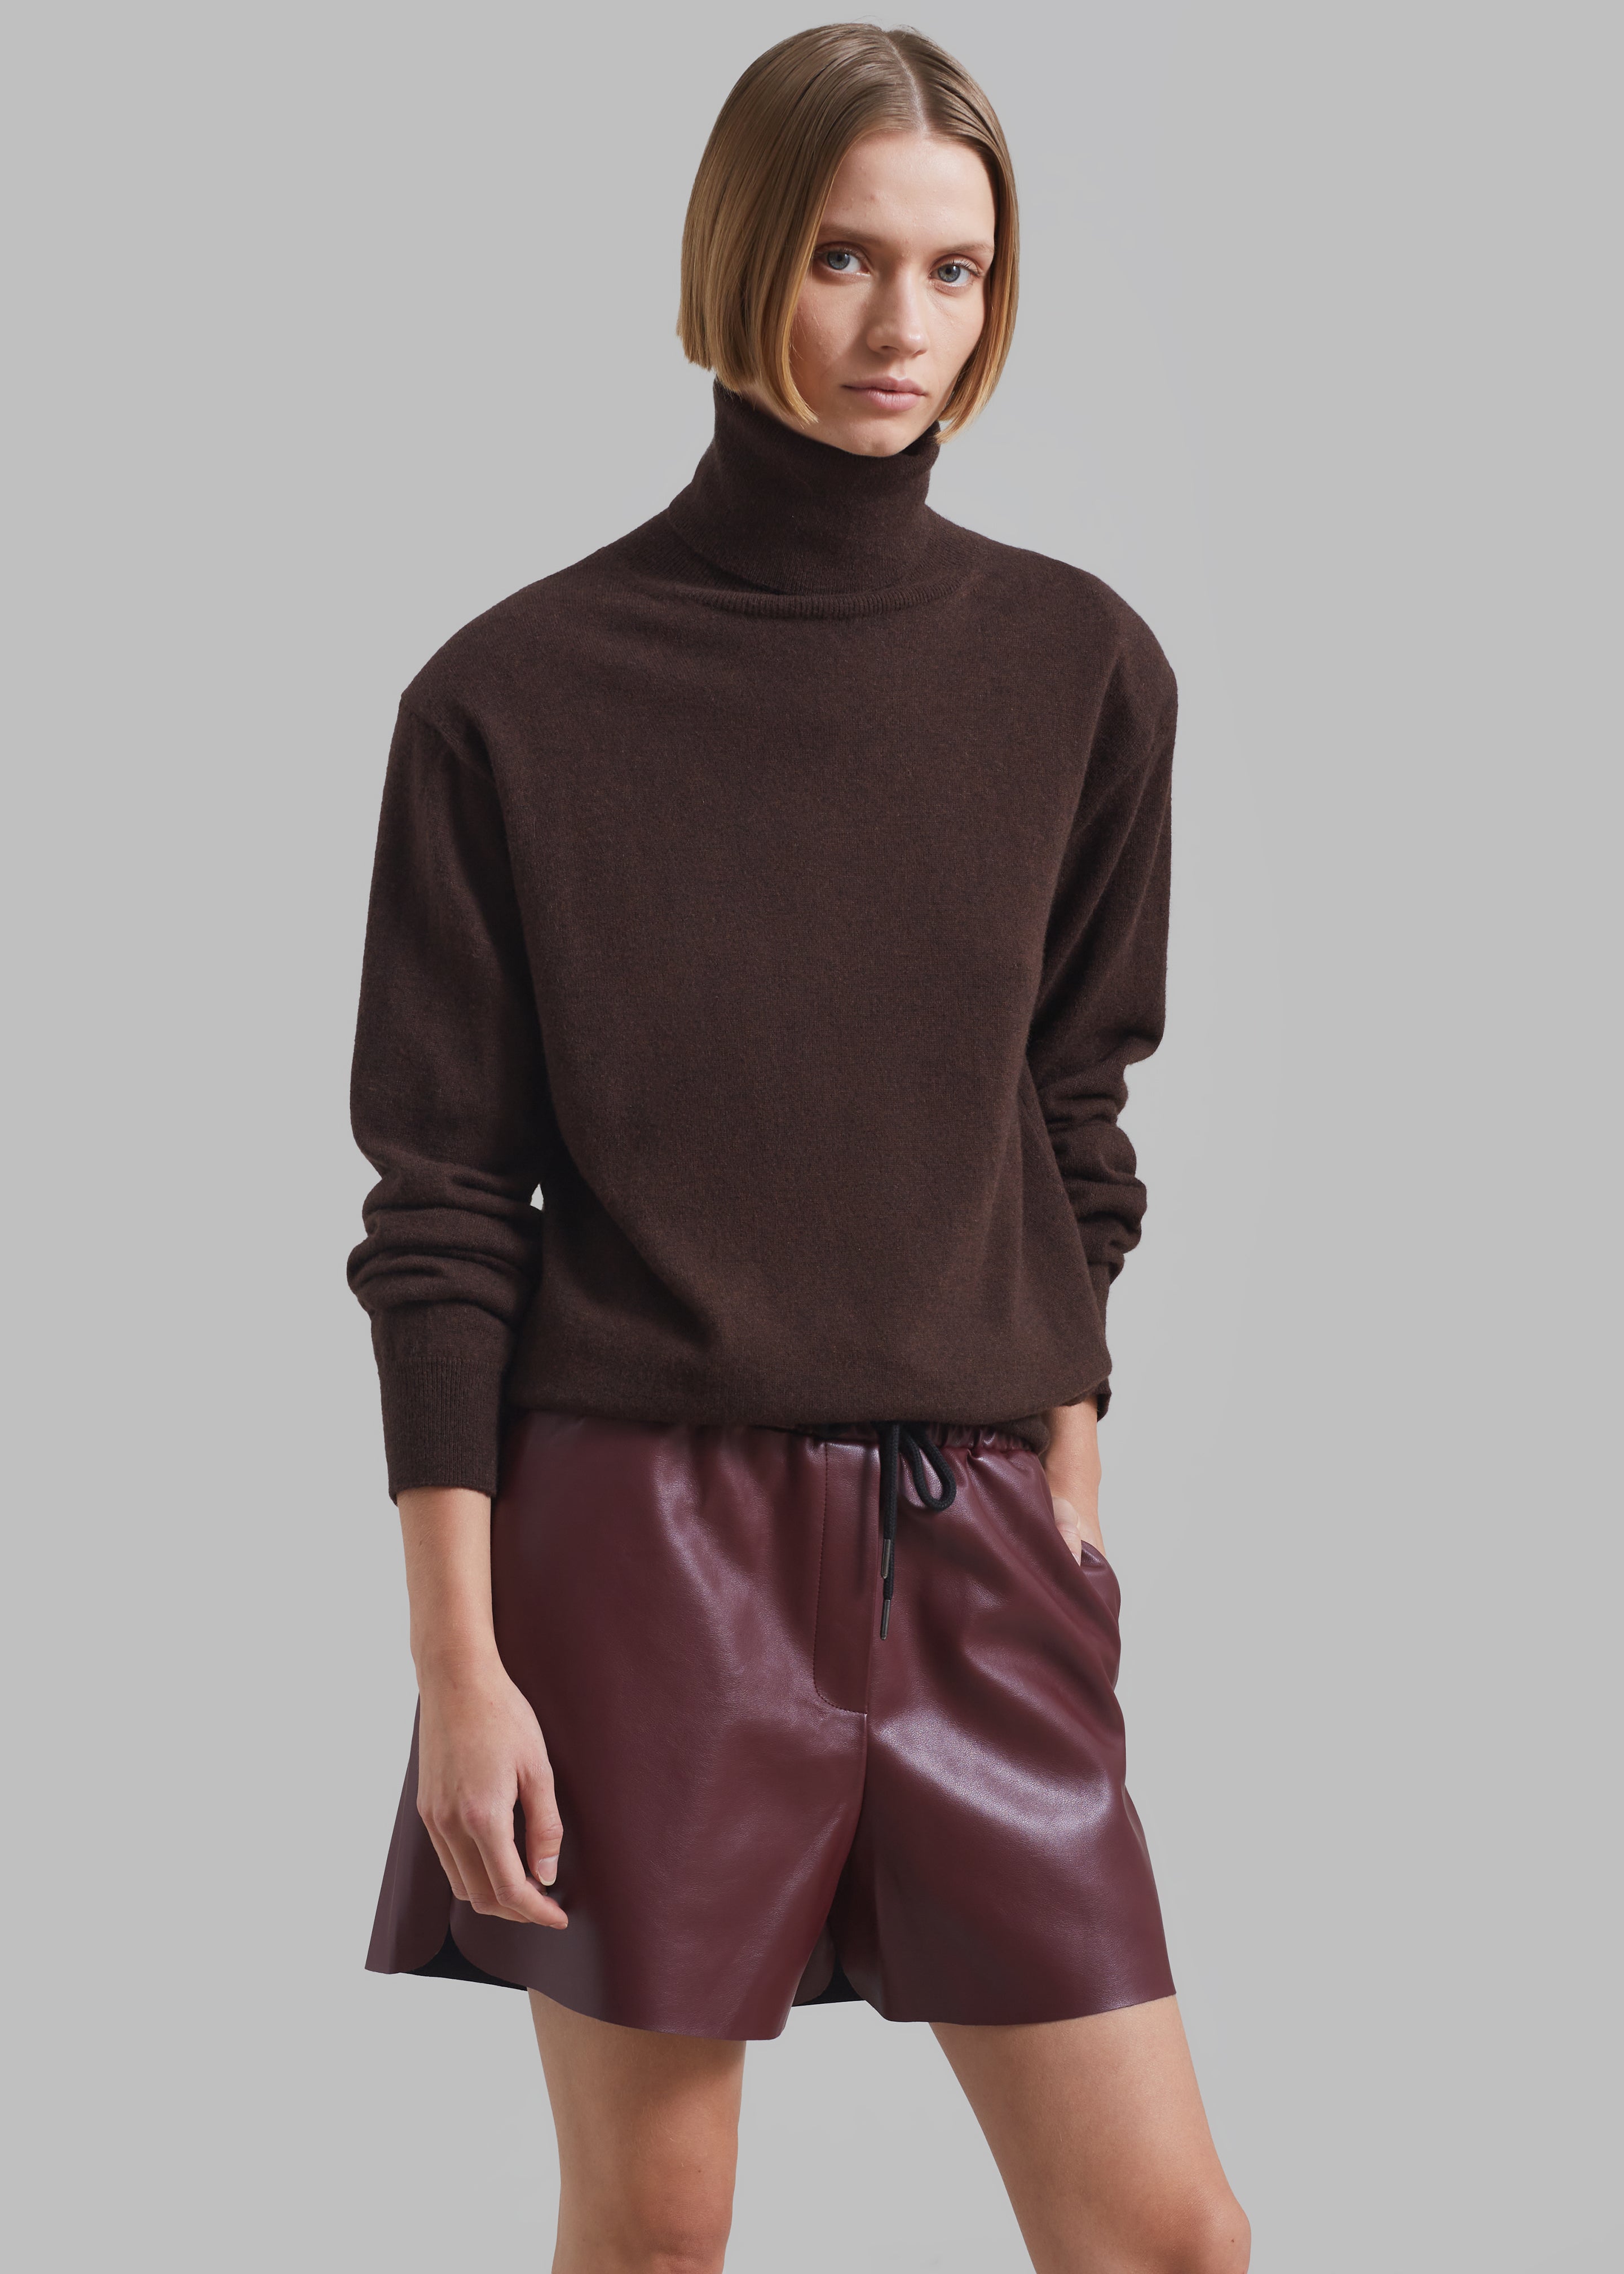 Ines Thin Padded Turtleneck - Brown - 8